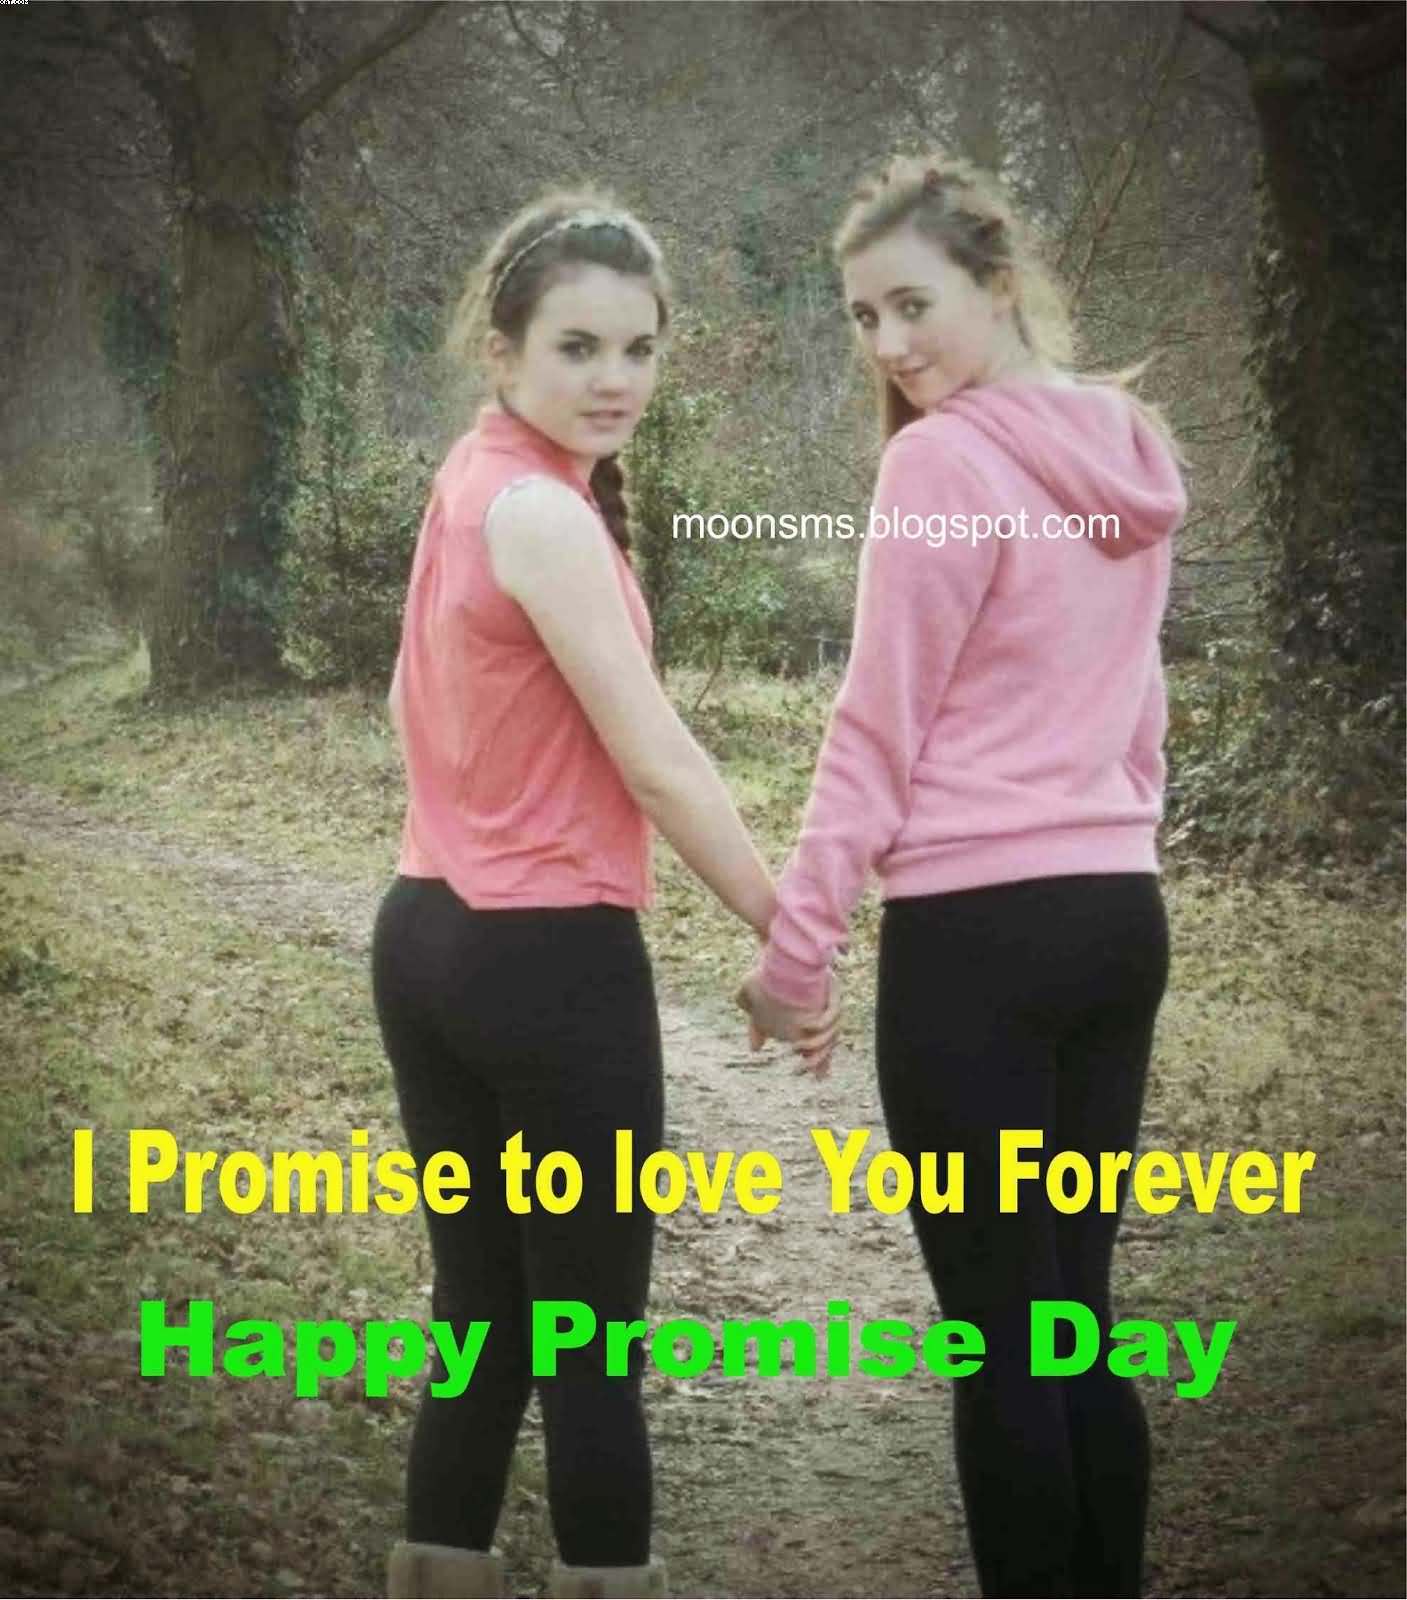 Happy Promise Day beautiful girls picture